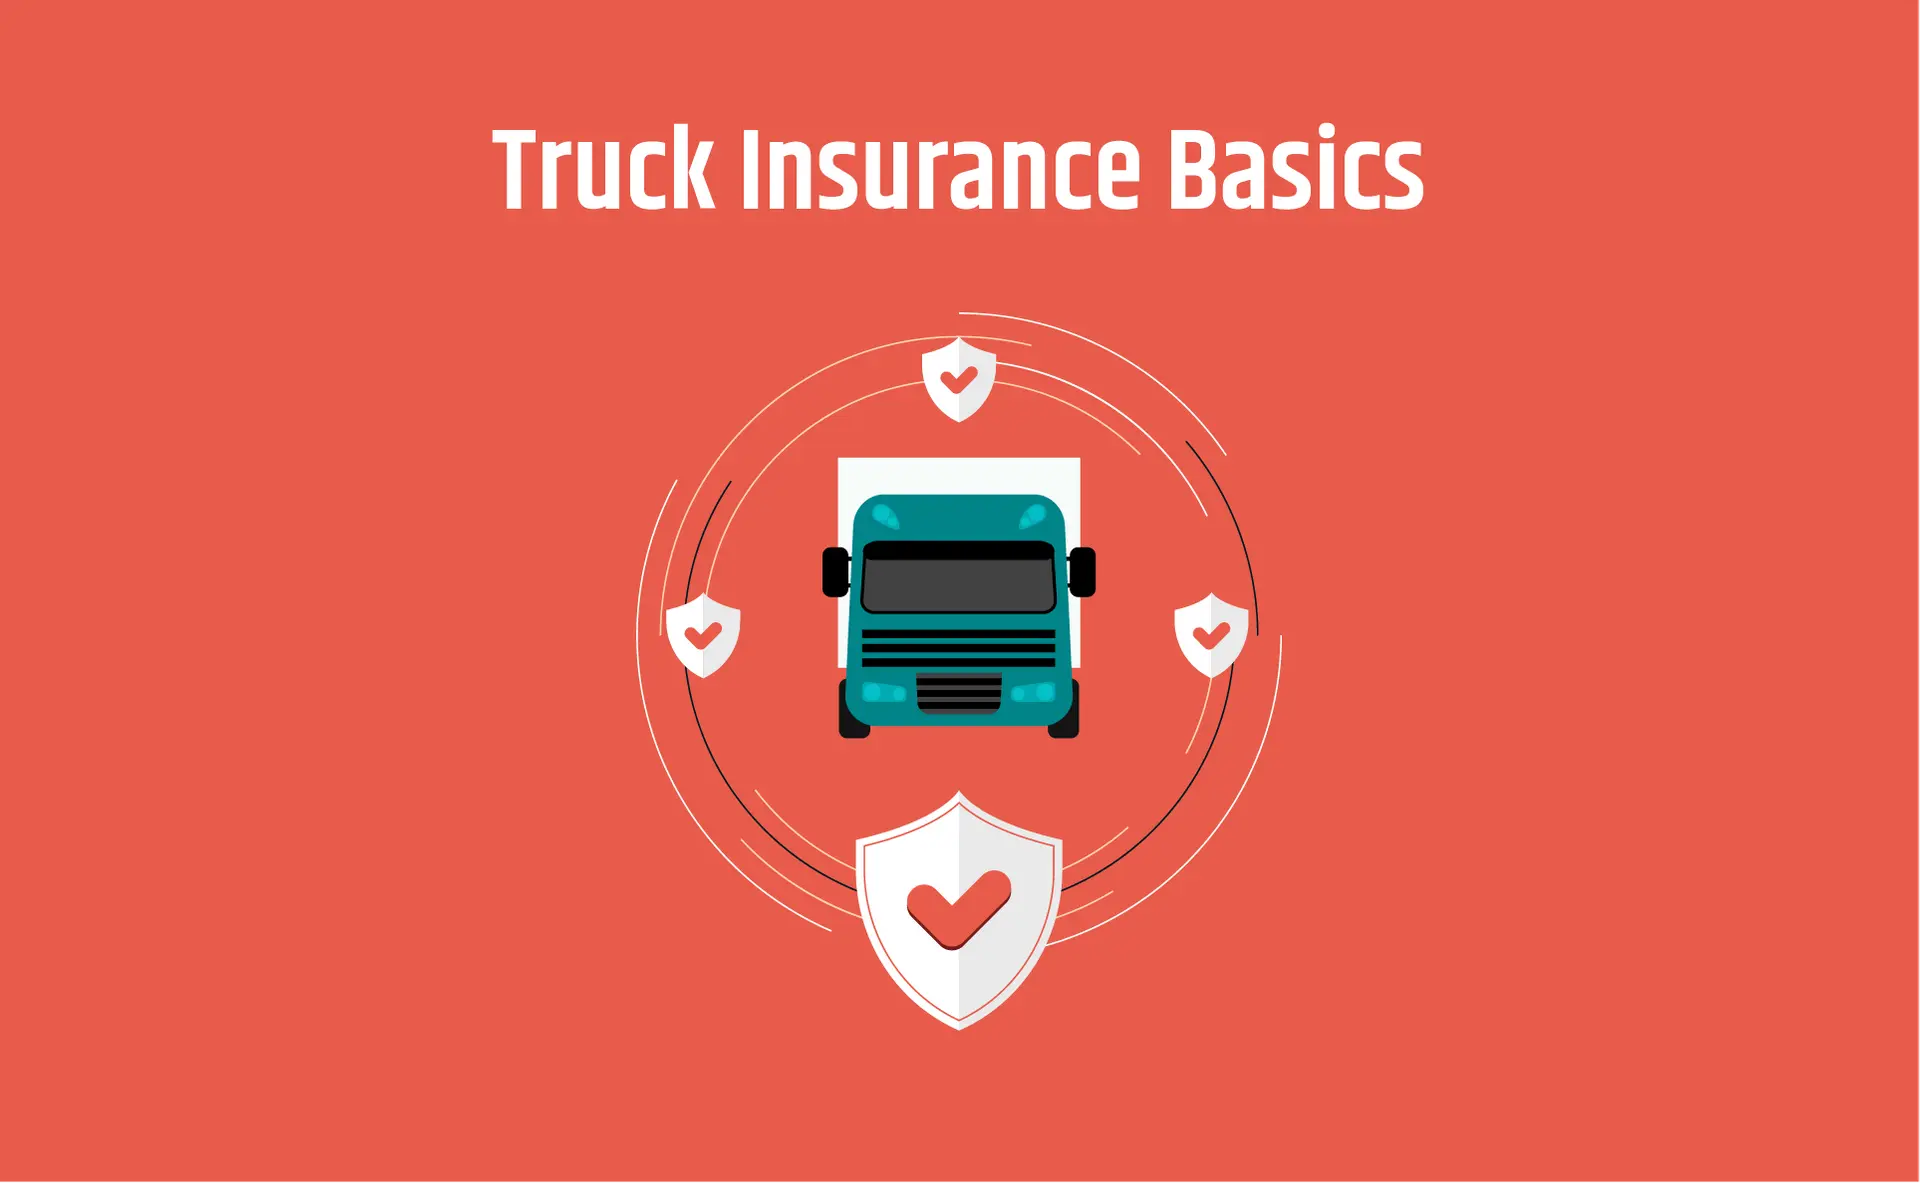 How To Claim Truck Insurance When Transporting Goods